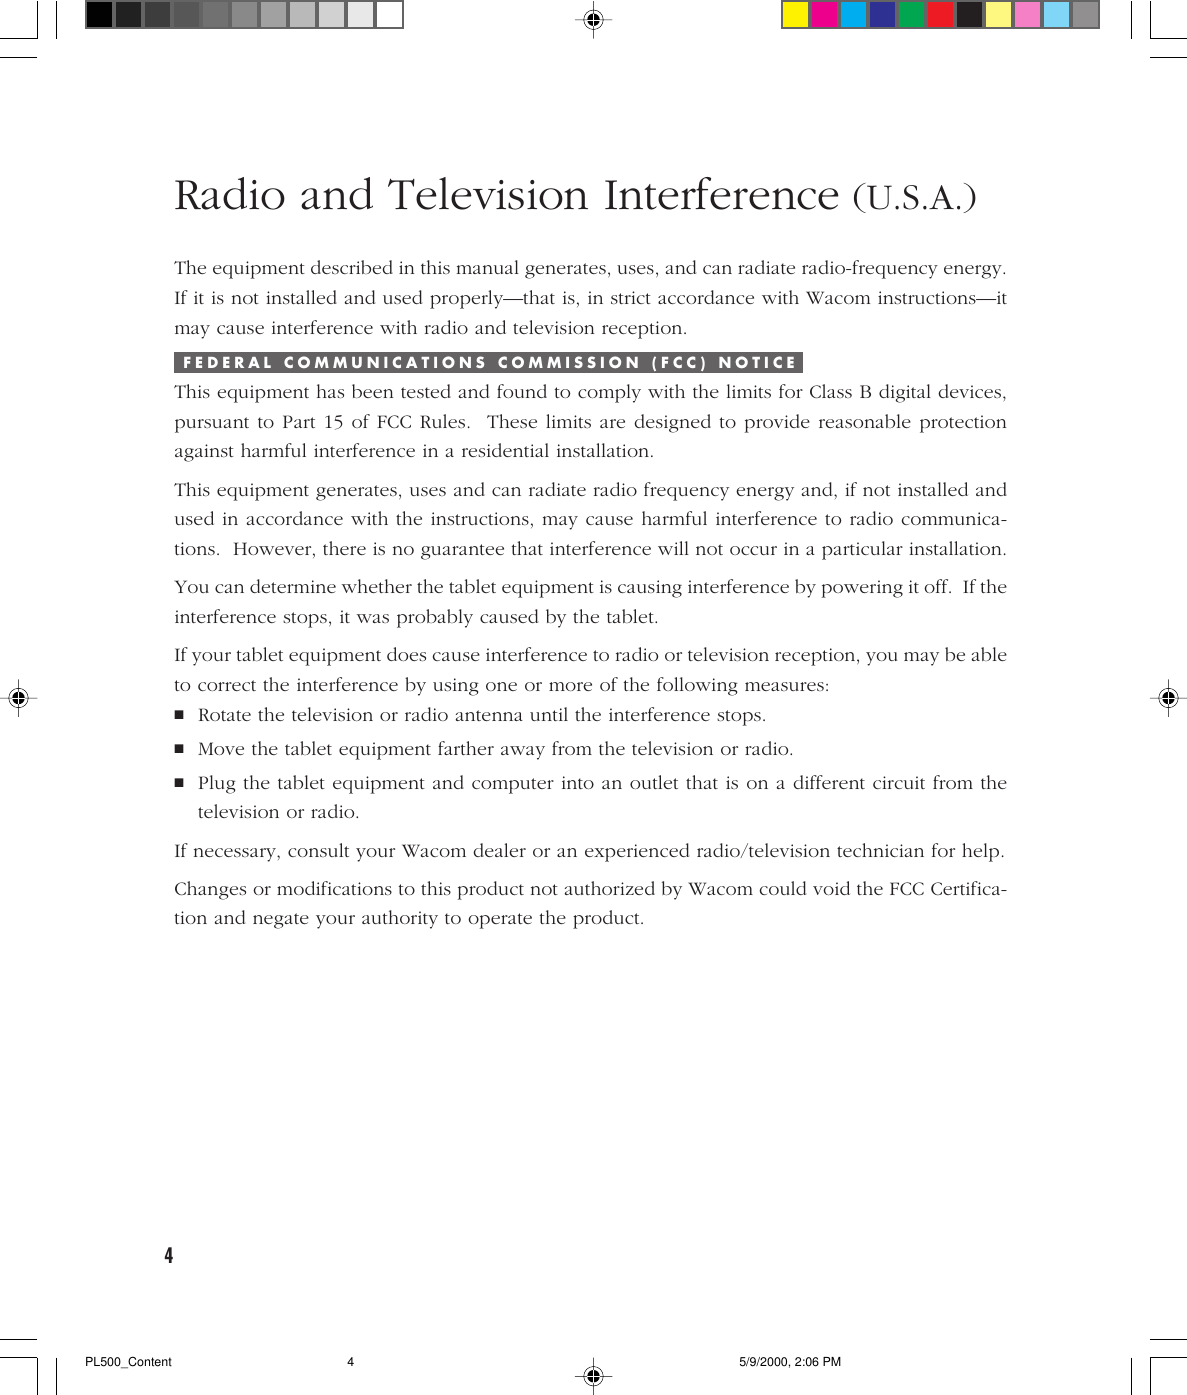 4Radio and Television Interference (U.S.A.)The equipment described in this manual generates, uses, and can radiate radio-frequency energy.If it is not installed and used properly—that is, in strict accordance with Wacom instructions—itmay cause interference with radio and television reception.F E D E R A L   C O M M U N I C A T I O N S   C O M M I S S I O N   ( F C C )   N O T I C EThis equipment has been tested and found to comply with the limits for Class B digital devices,pursuant to Part 15 of FCC Rules.  These limits are designed to provide reasonable protectionagainst harmful interference in a residential installation.This equipment generates, uses and can radiate radio frequency energy and, if not installed andused in accordance with the instructions, may cause harmful interference to radio communica-tions.  However, there is no guarantee that interference will not occur in a particular installation.You can determine whether the tablet equipment is causing interference by powering it off.  If theinterference stops, it was probably caused by the tablet.If your tablet equipment does cause interference to radio or television reception, you may be ableto correct the interference by using one or more of the following measures:■Rotate the television or radio antenna until the interference stops.■Move the tablet equipment farther away from the television or radio.■Plug the tablet equipment and computer into an outlet that is on a different circuit from thetelevision or radio.If necessary, consult your Wacom dealer or an experienced radio/television technician for help.Changes or modifications to this product not authorized by Wacom could void the FCC Certifica-tion and negate your authority to operate the product.PL500_Content 5/9/2000, 2:06 PM4